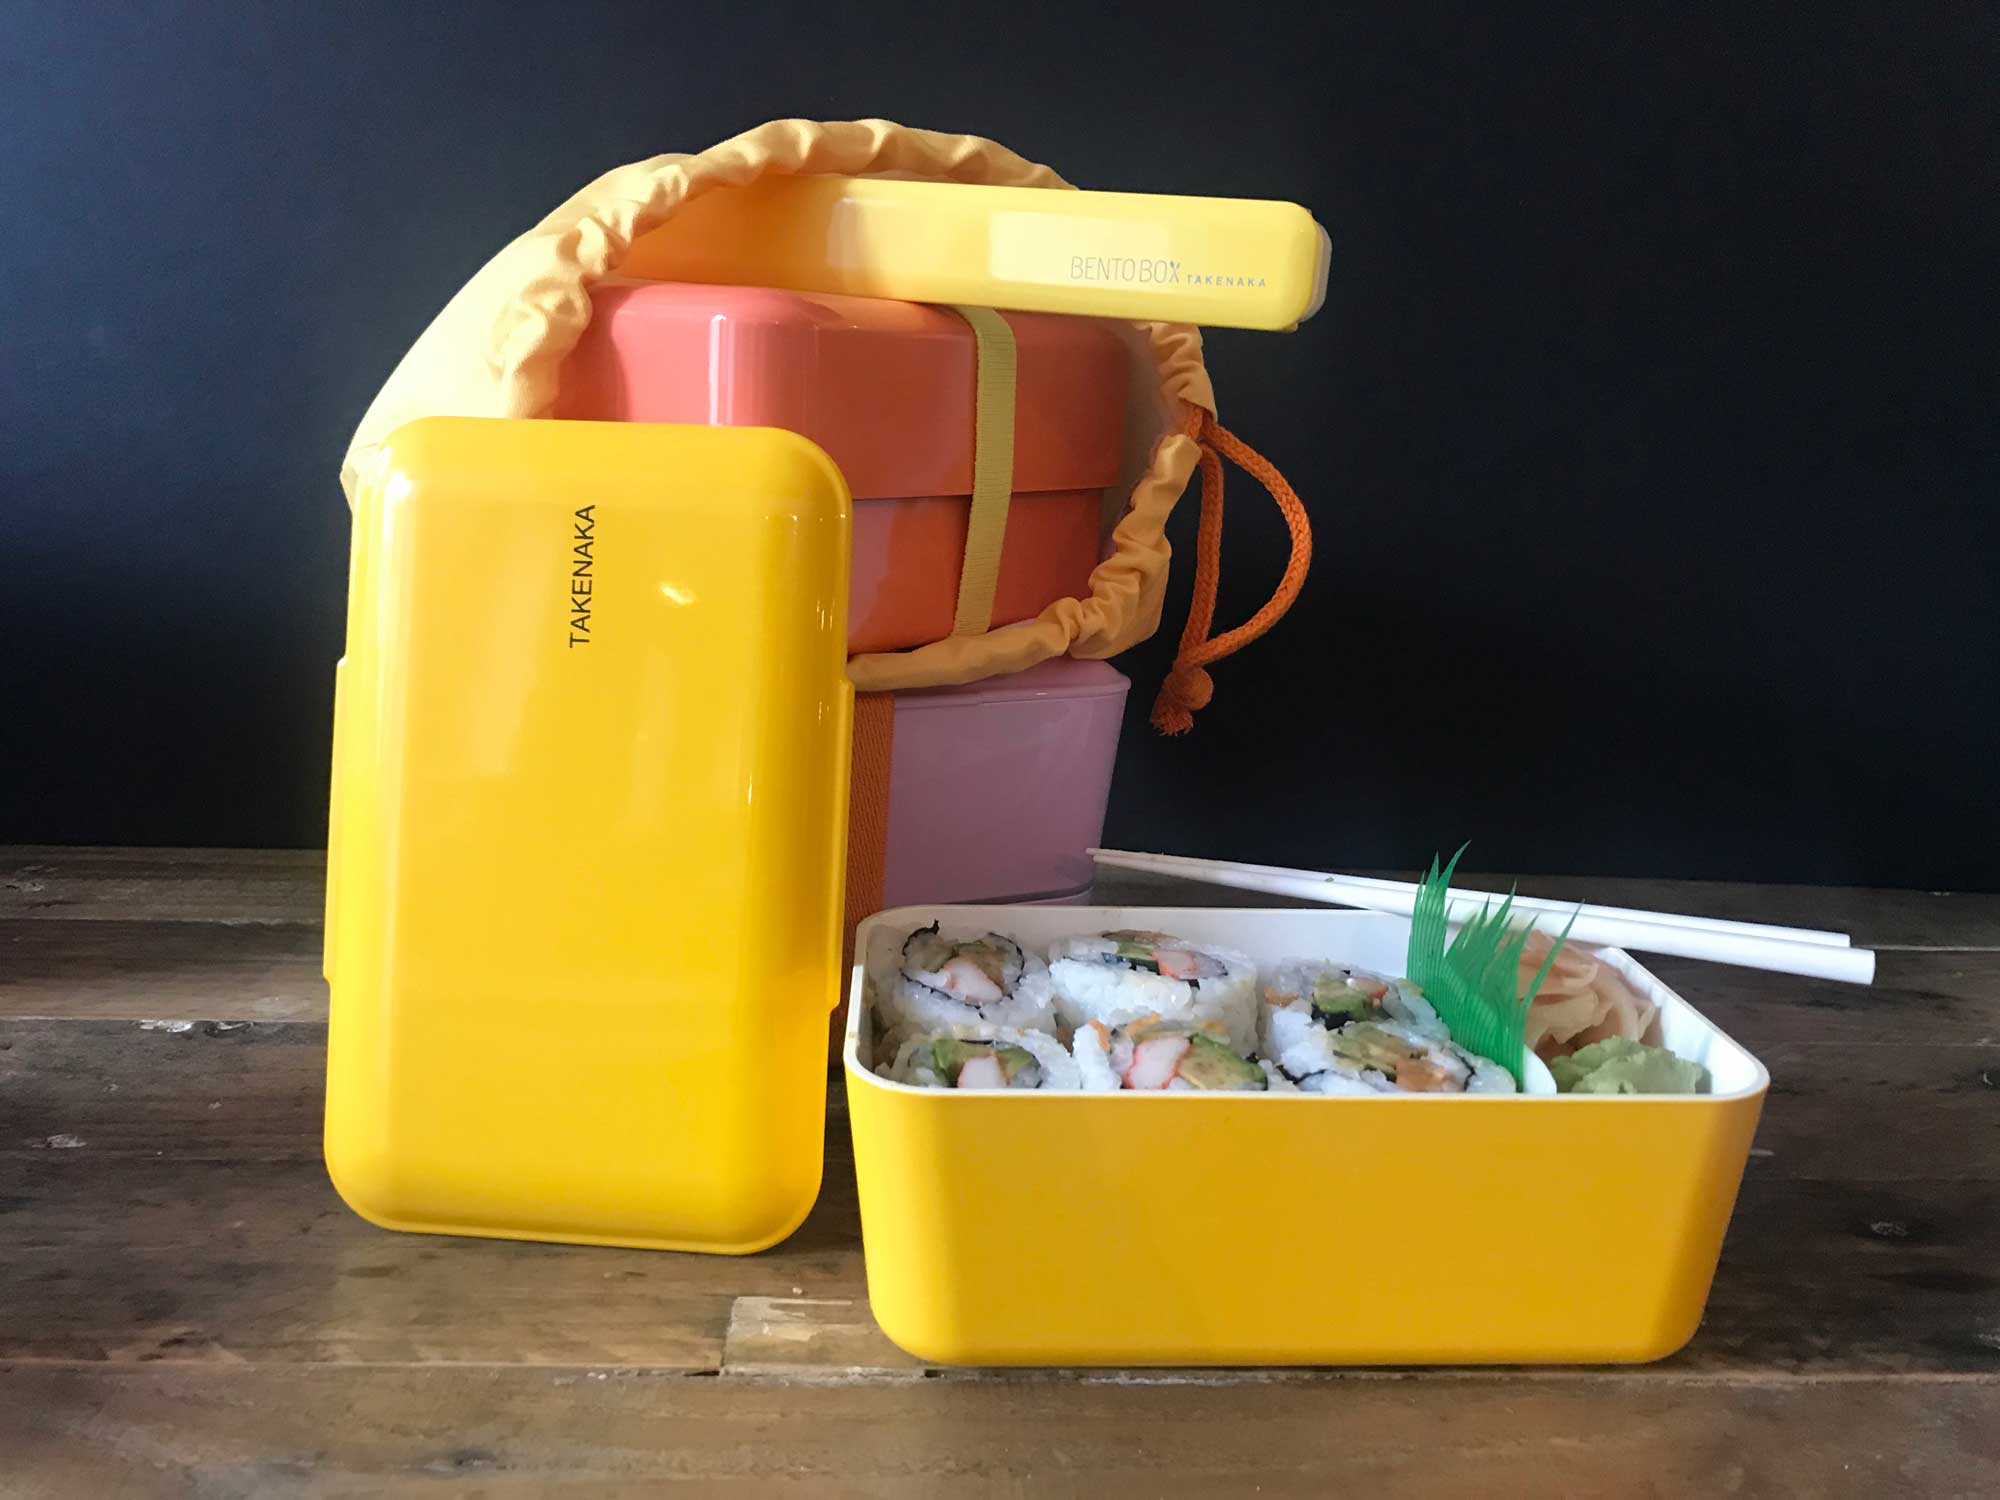 TOP 3 Lunch Box Accessories You Need – Teuko Blog